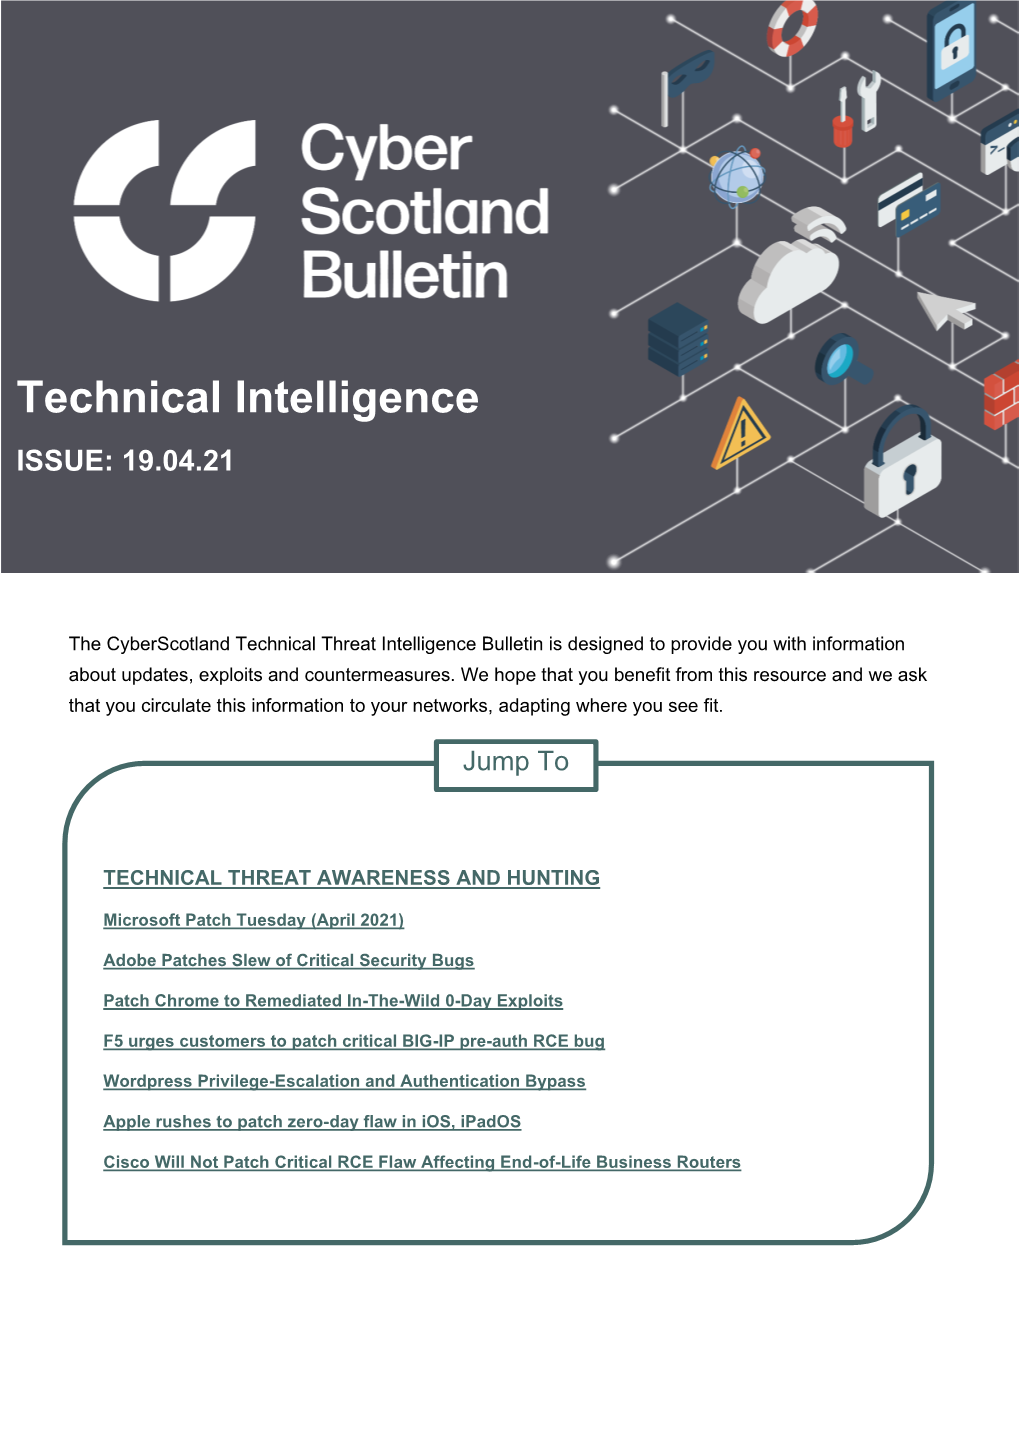 Technical Intelligence ISSUE: 19.04.21